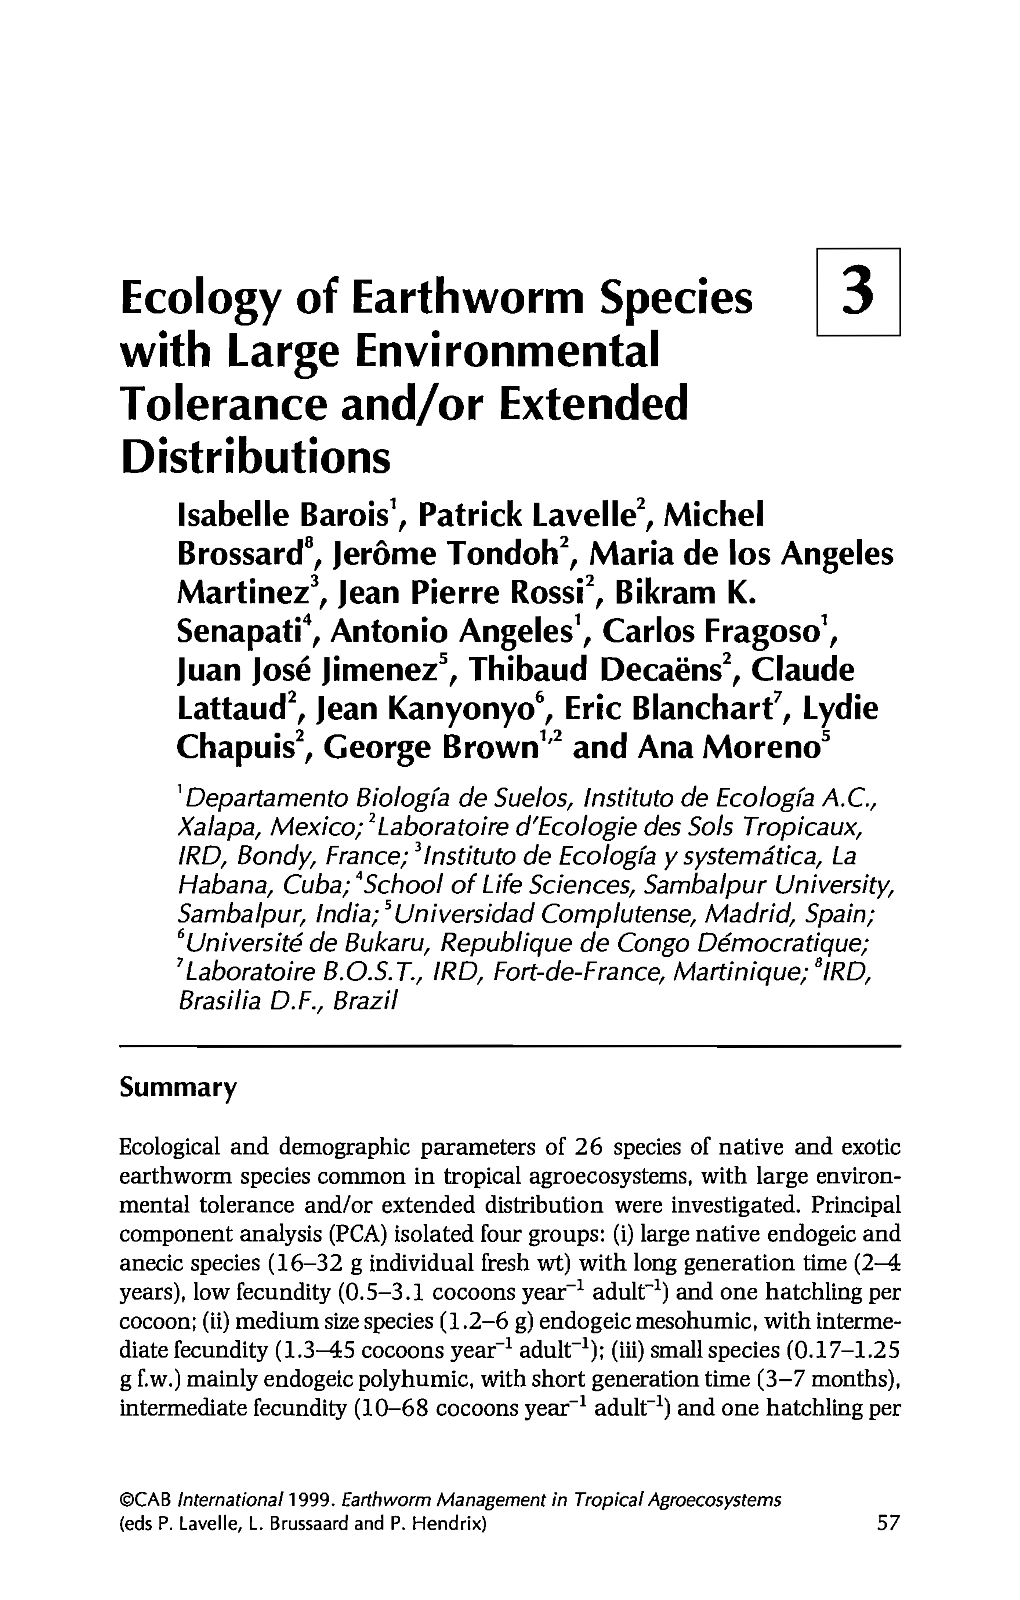 Ecology of Earthworm Species with Large Environmental Tolerance And